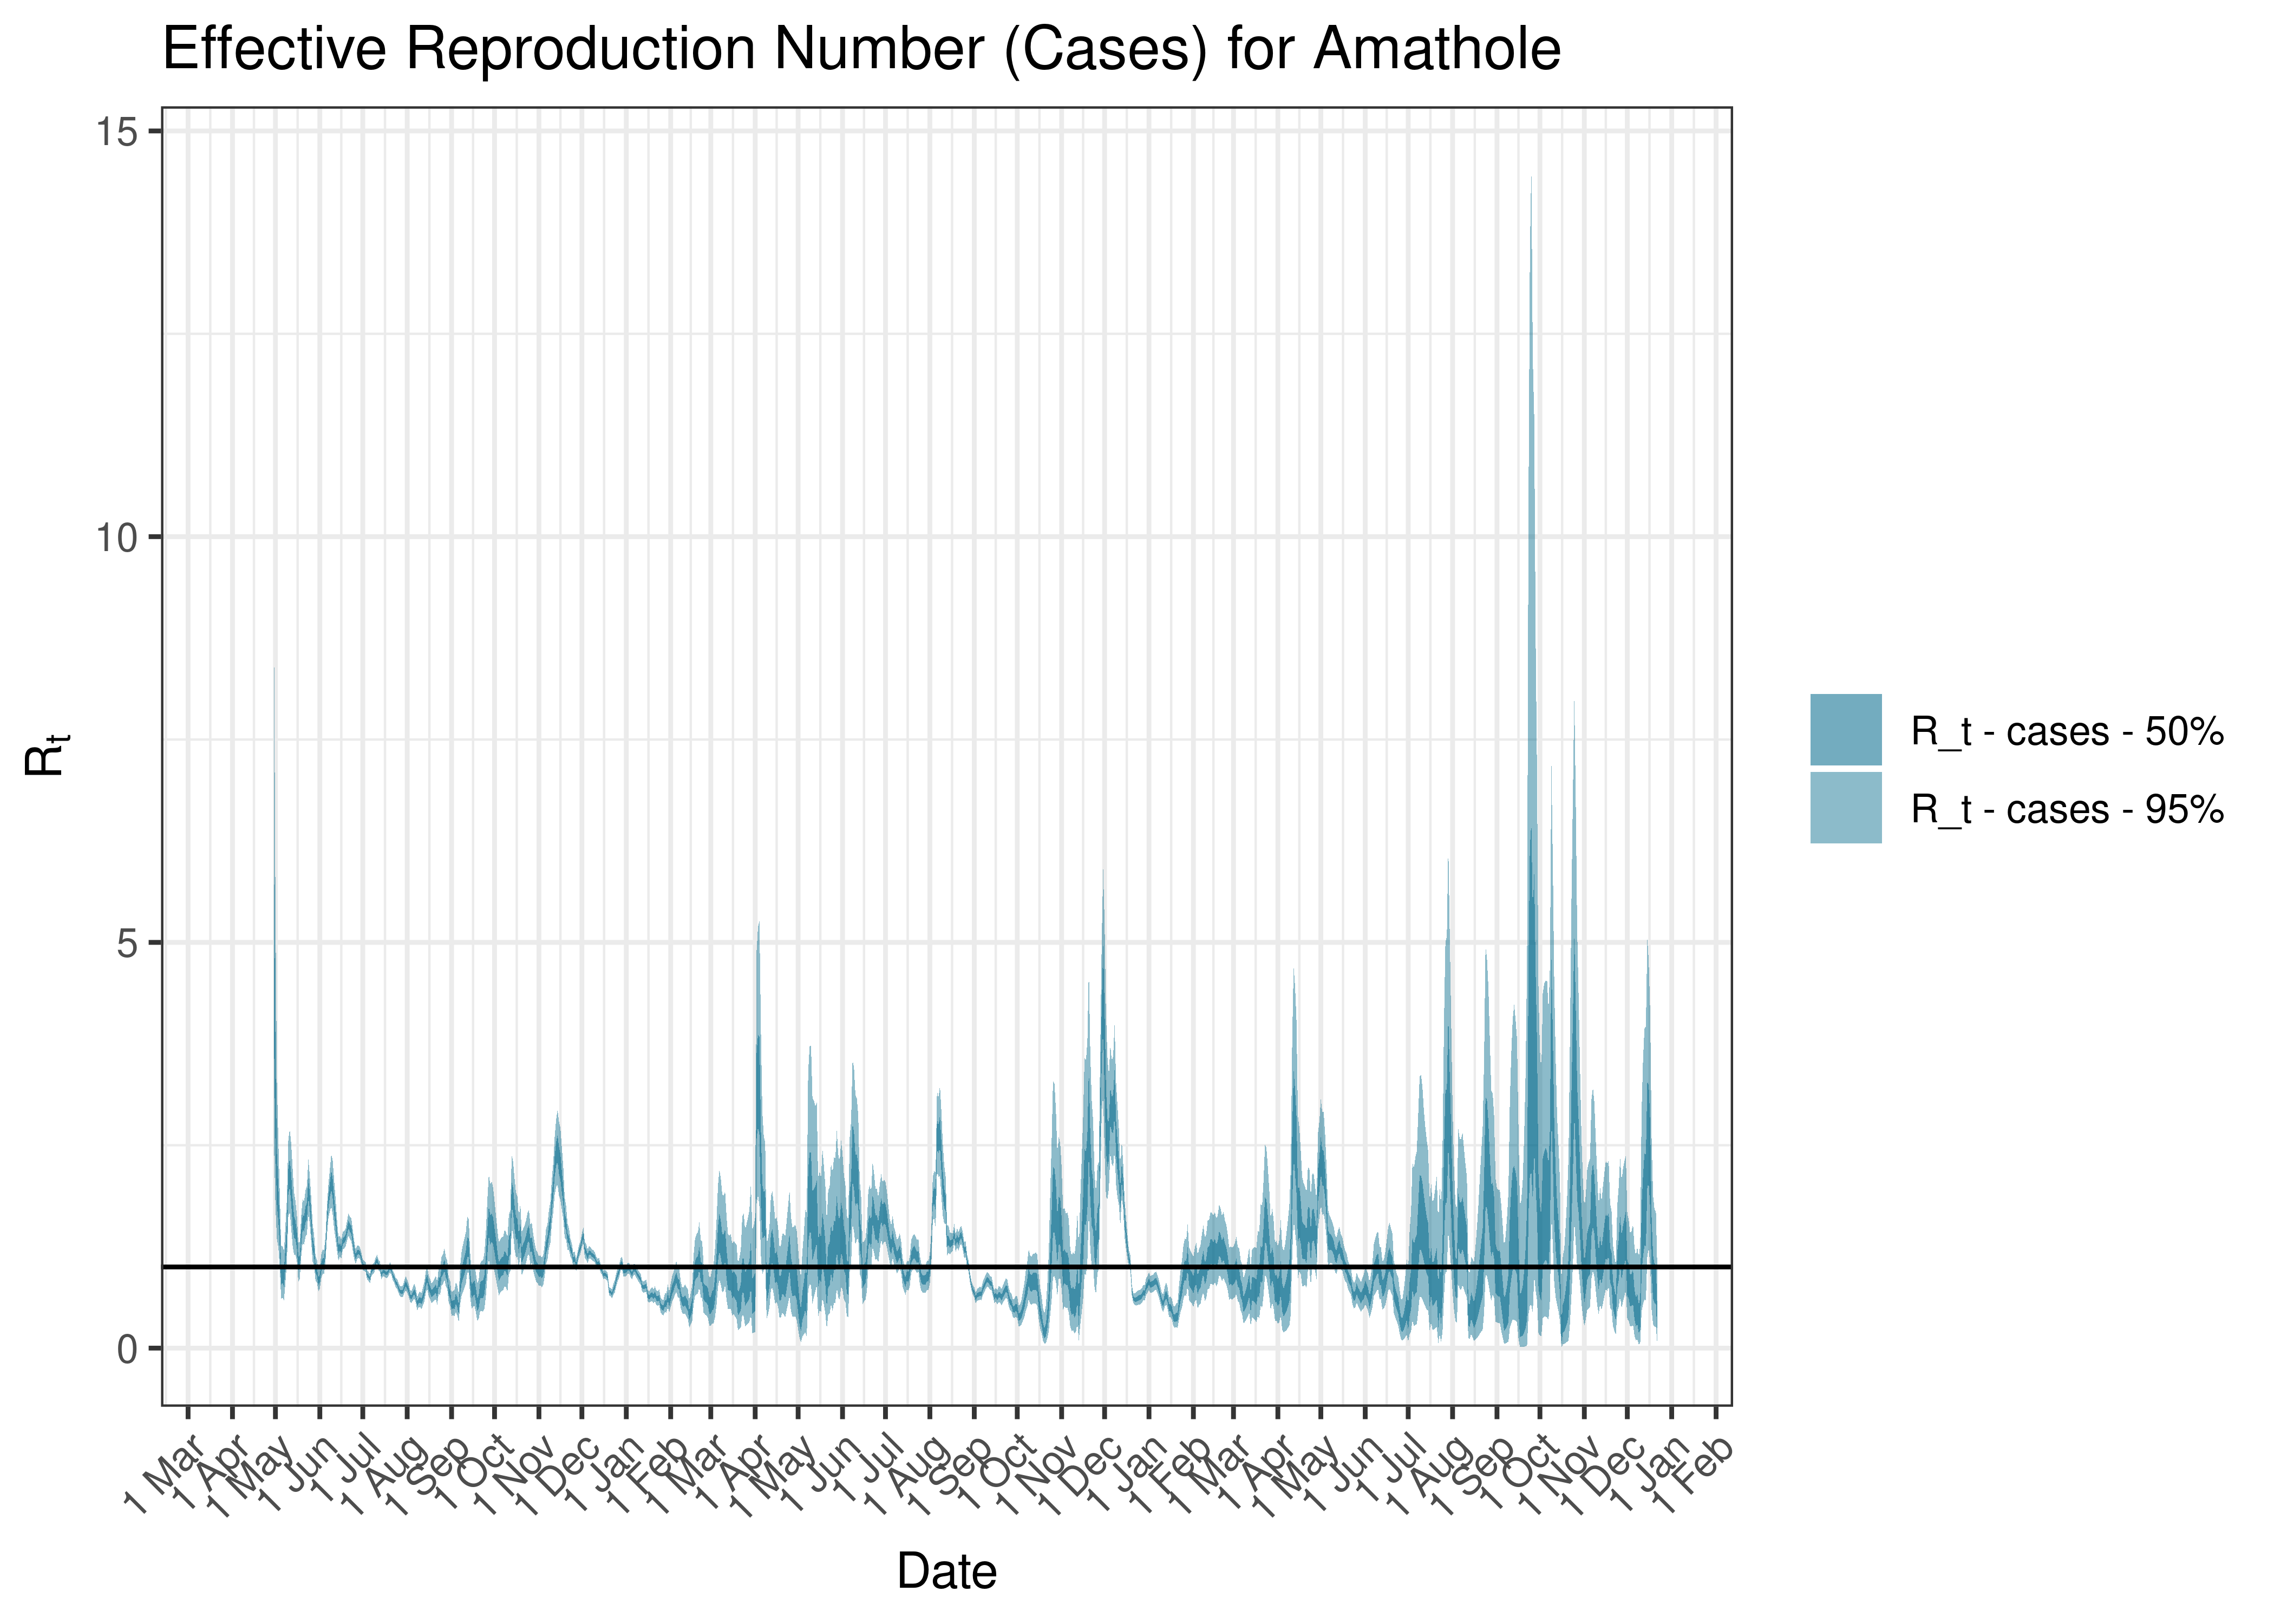 Estimated Effective Reproduction Number Based on Cases for Amathole since 1 April 2020